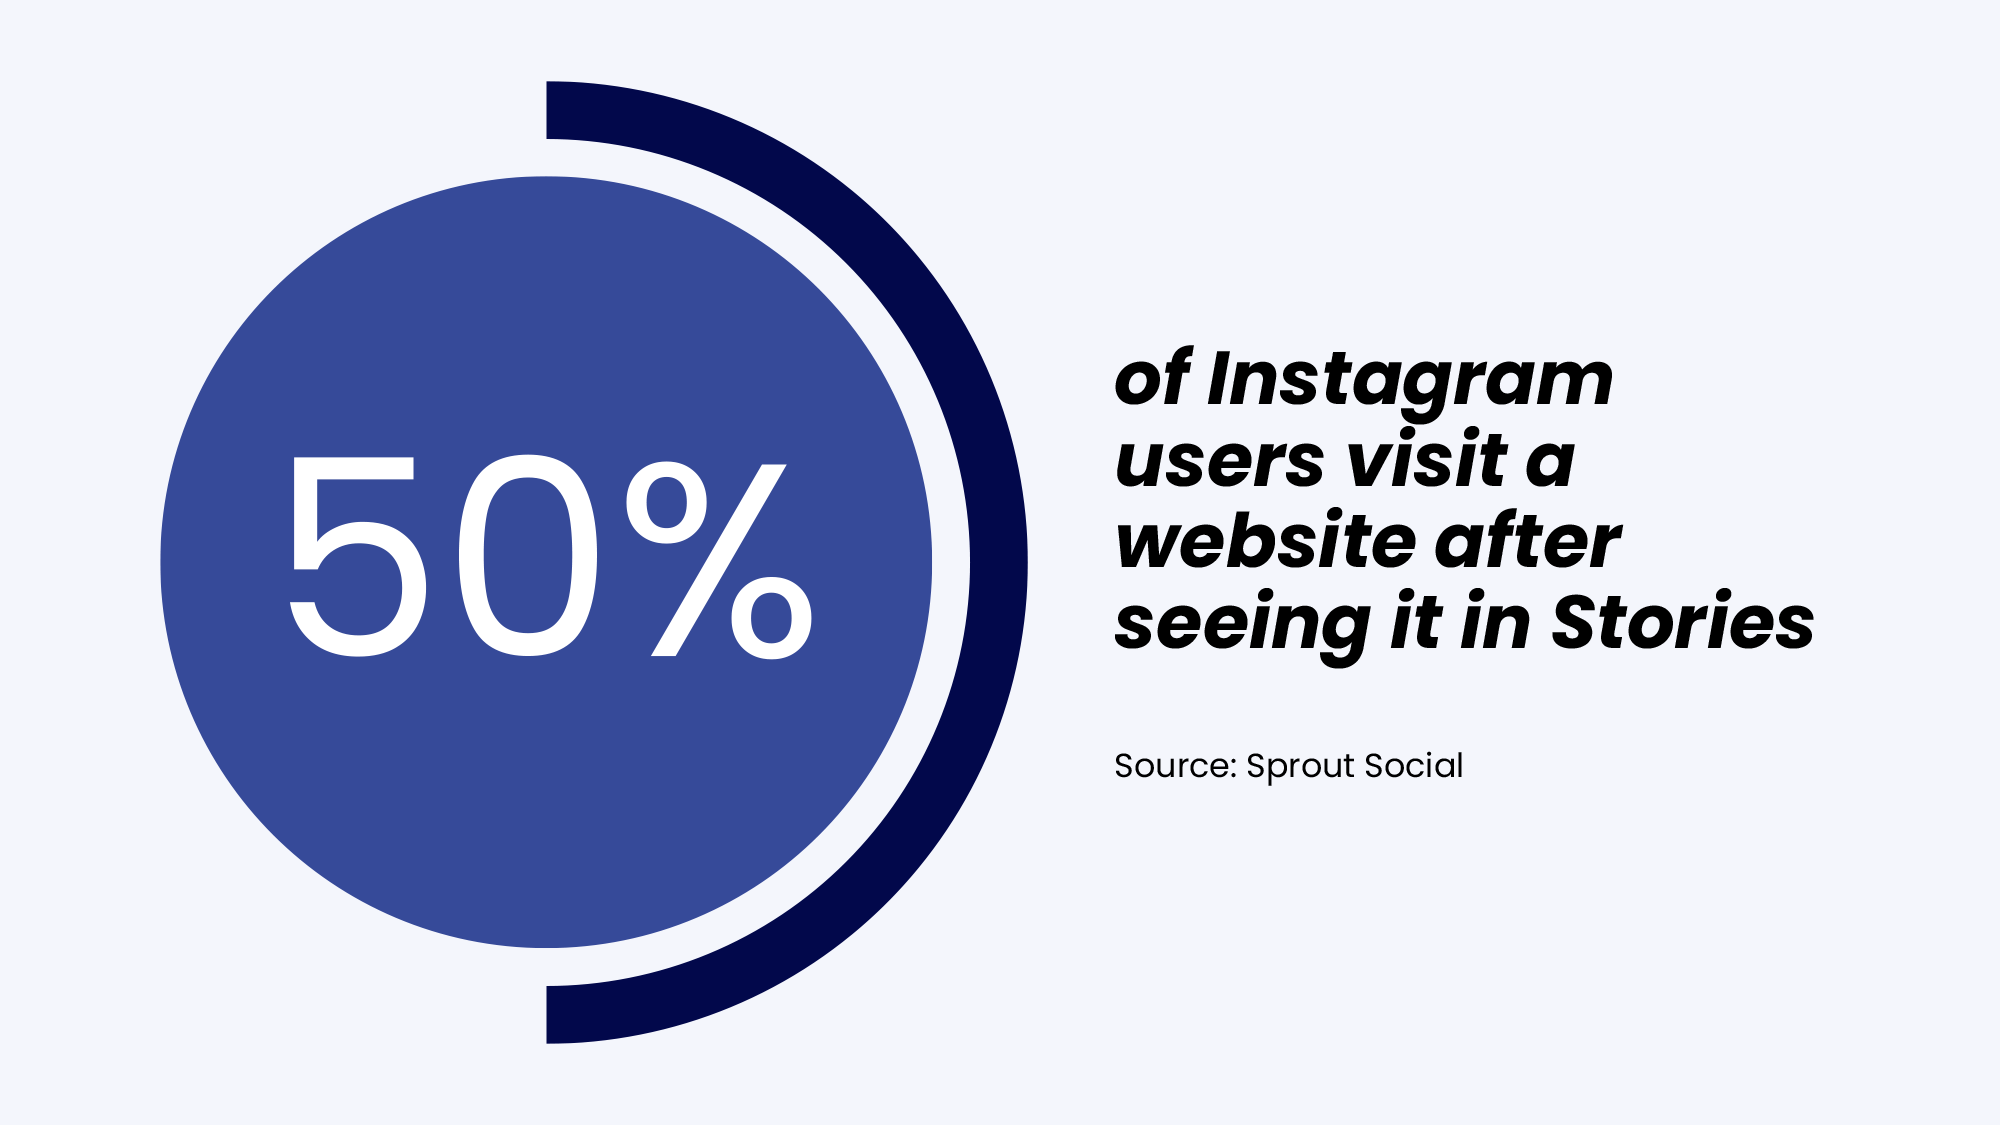 50% of Instagram users visit a website after seeing it in Stories